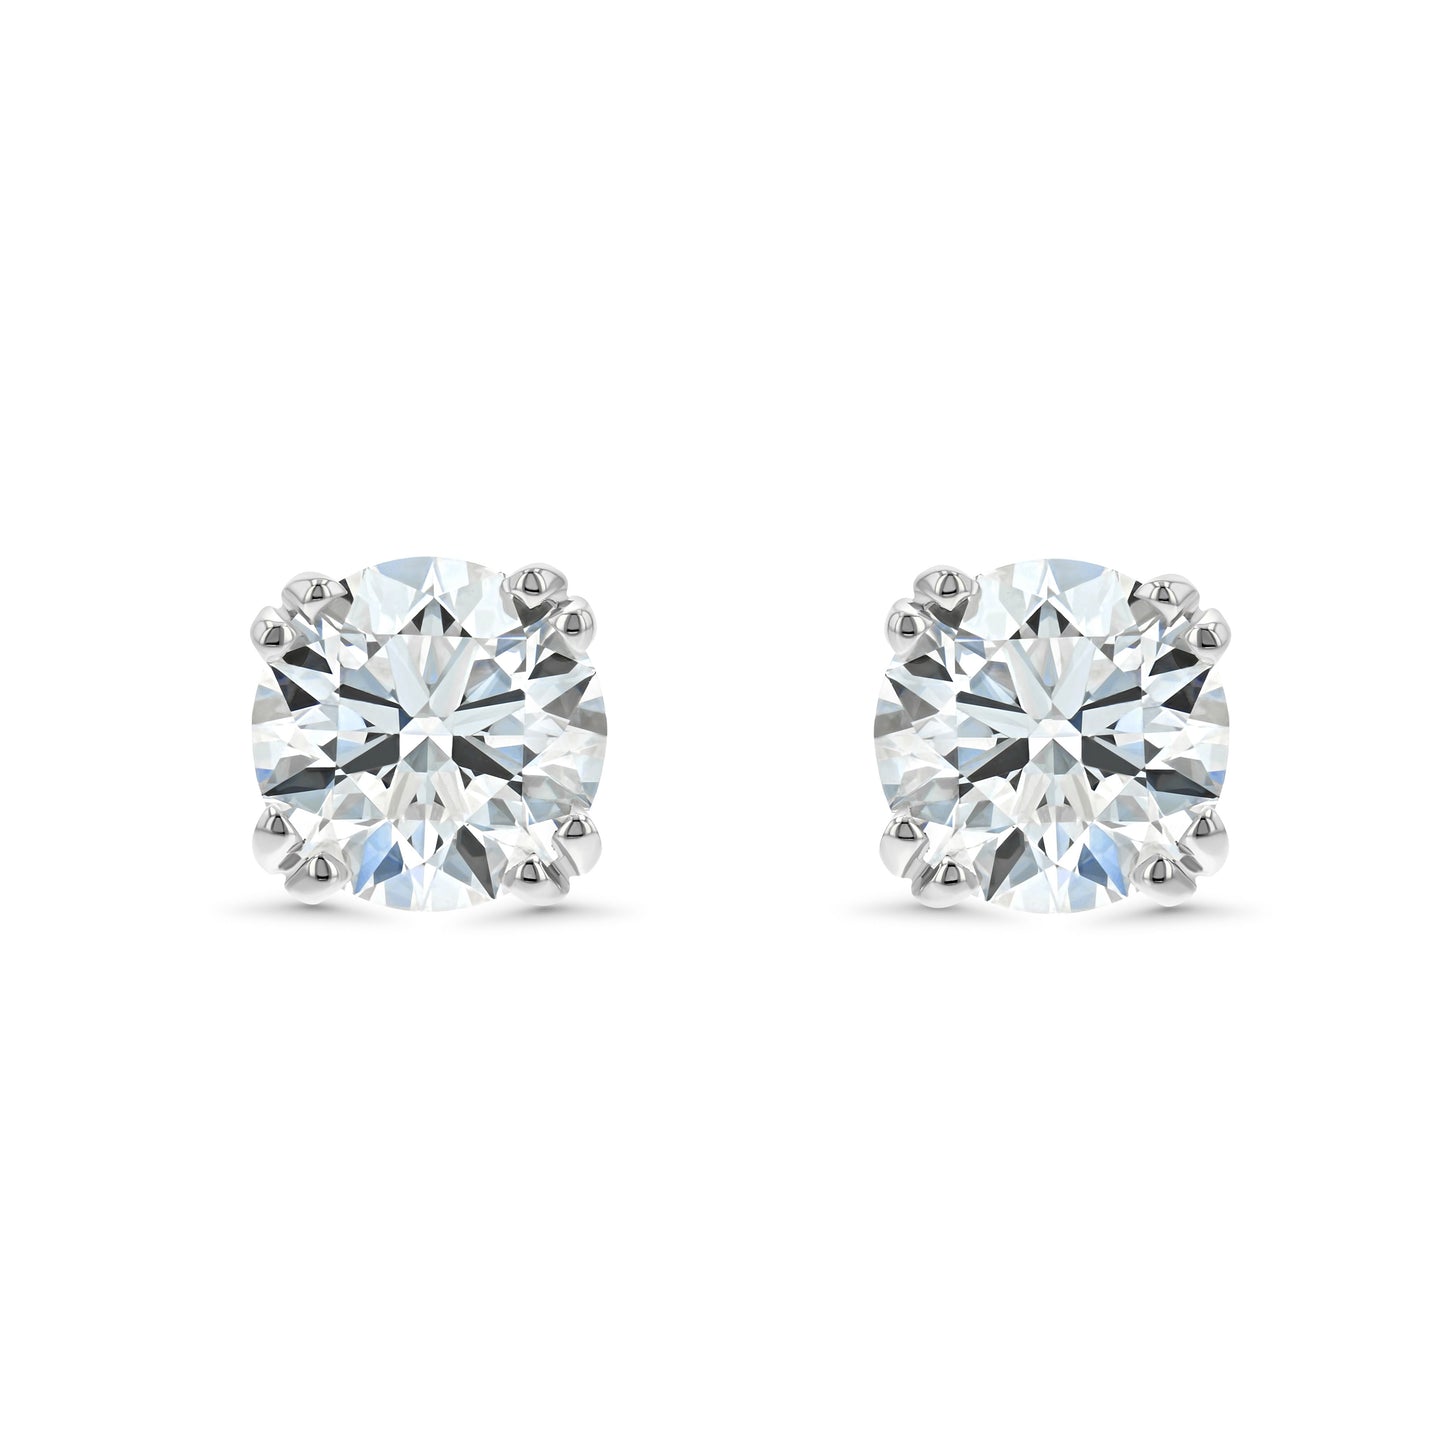 18k White Gold 8-prong Round Brilliant Diamond Stud Earrings (1 Ct. T.w., Si1-si2 Clarity, H-i Color)